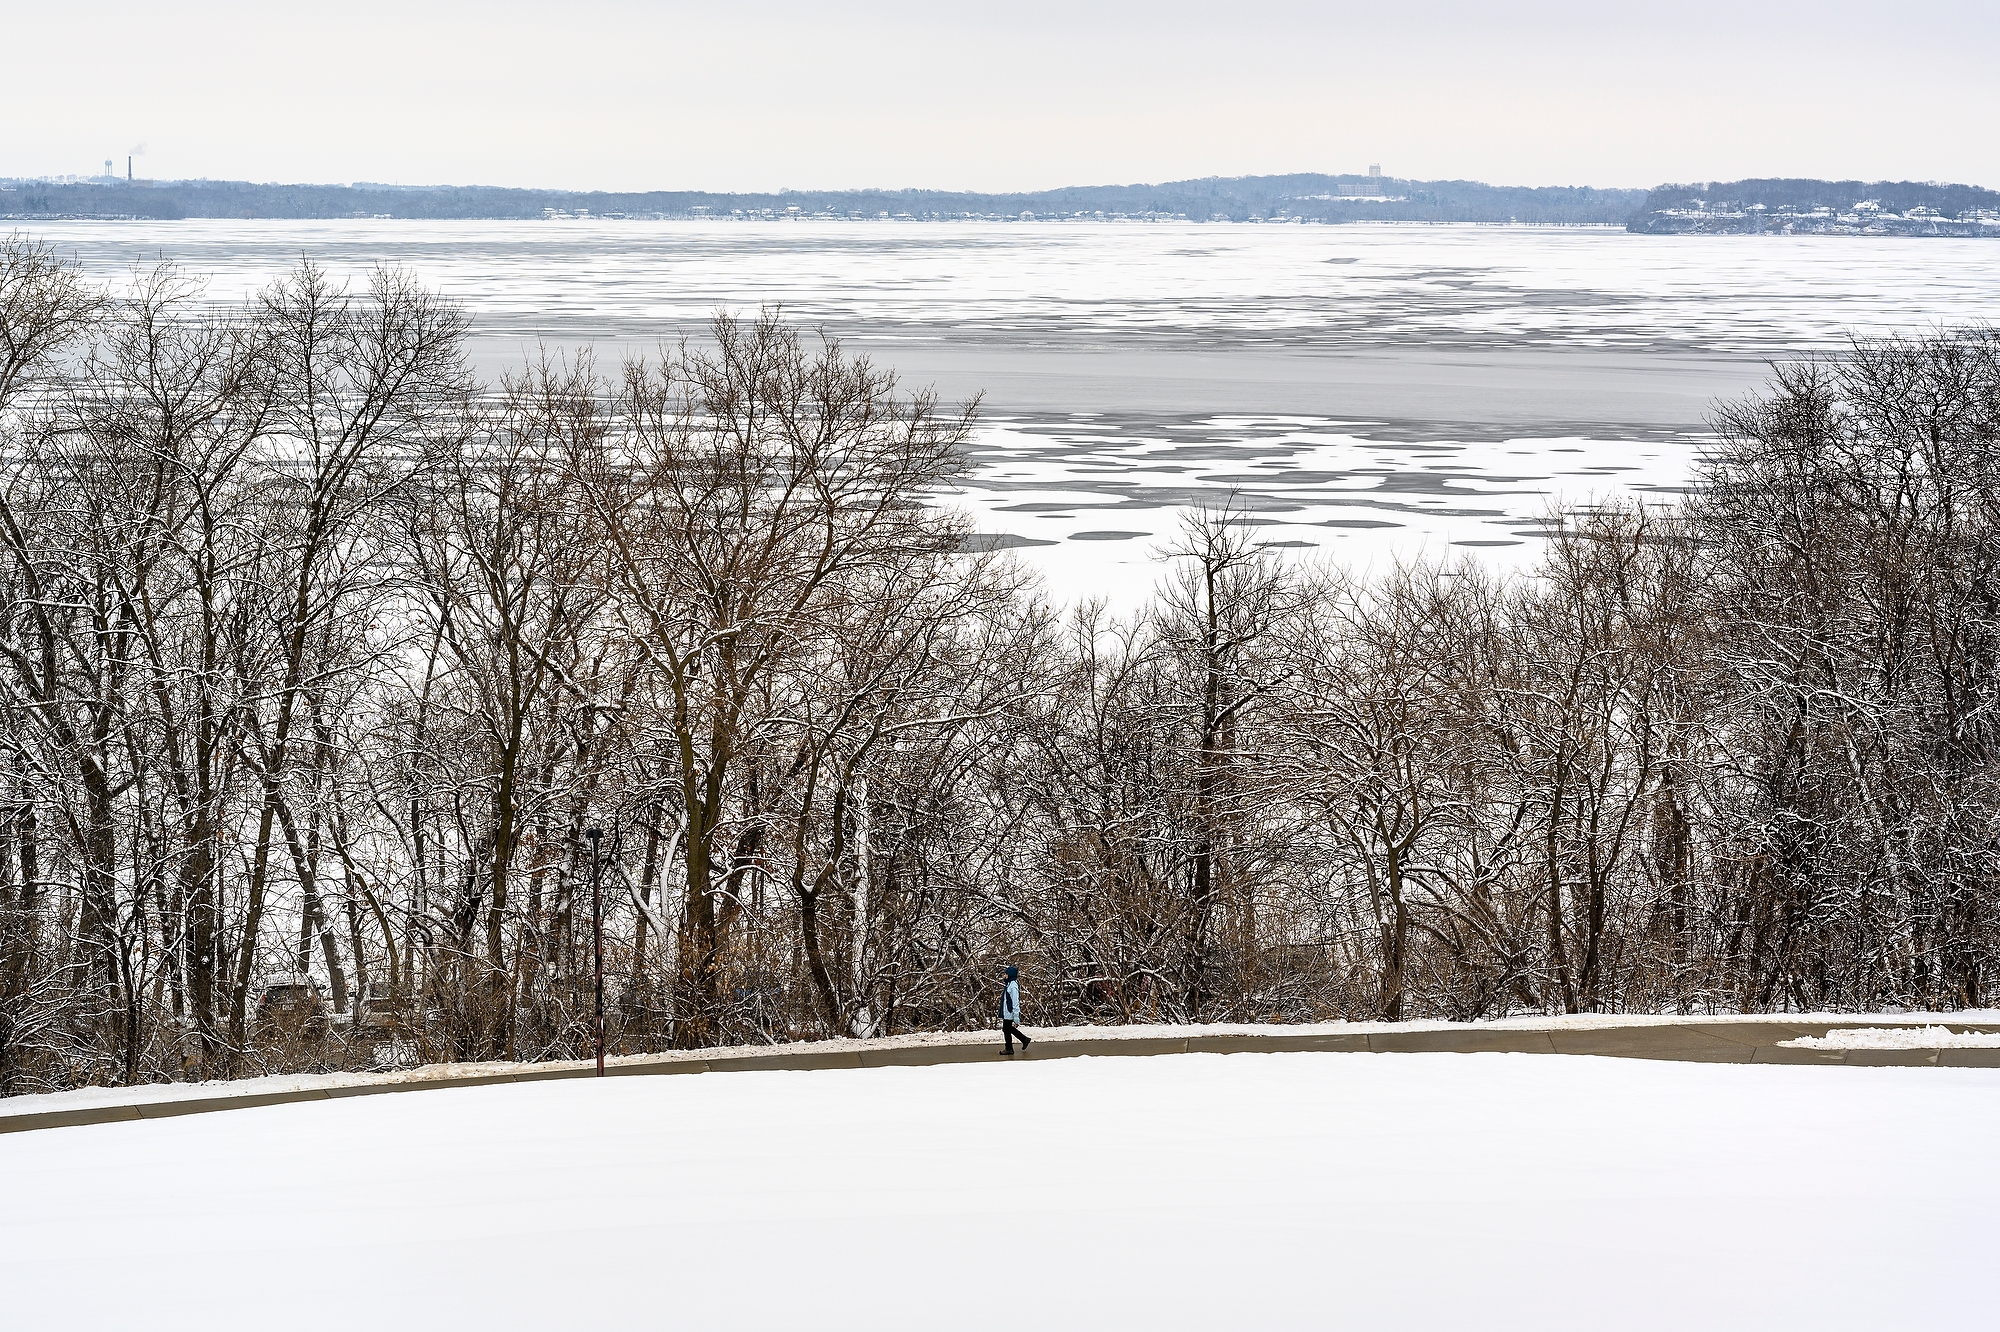 Lake Mendota with ice and open water